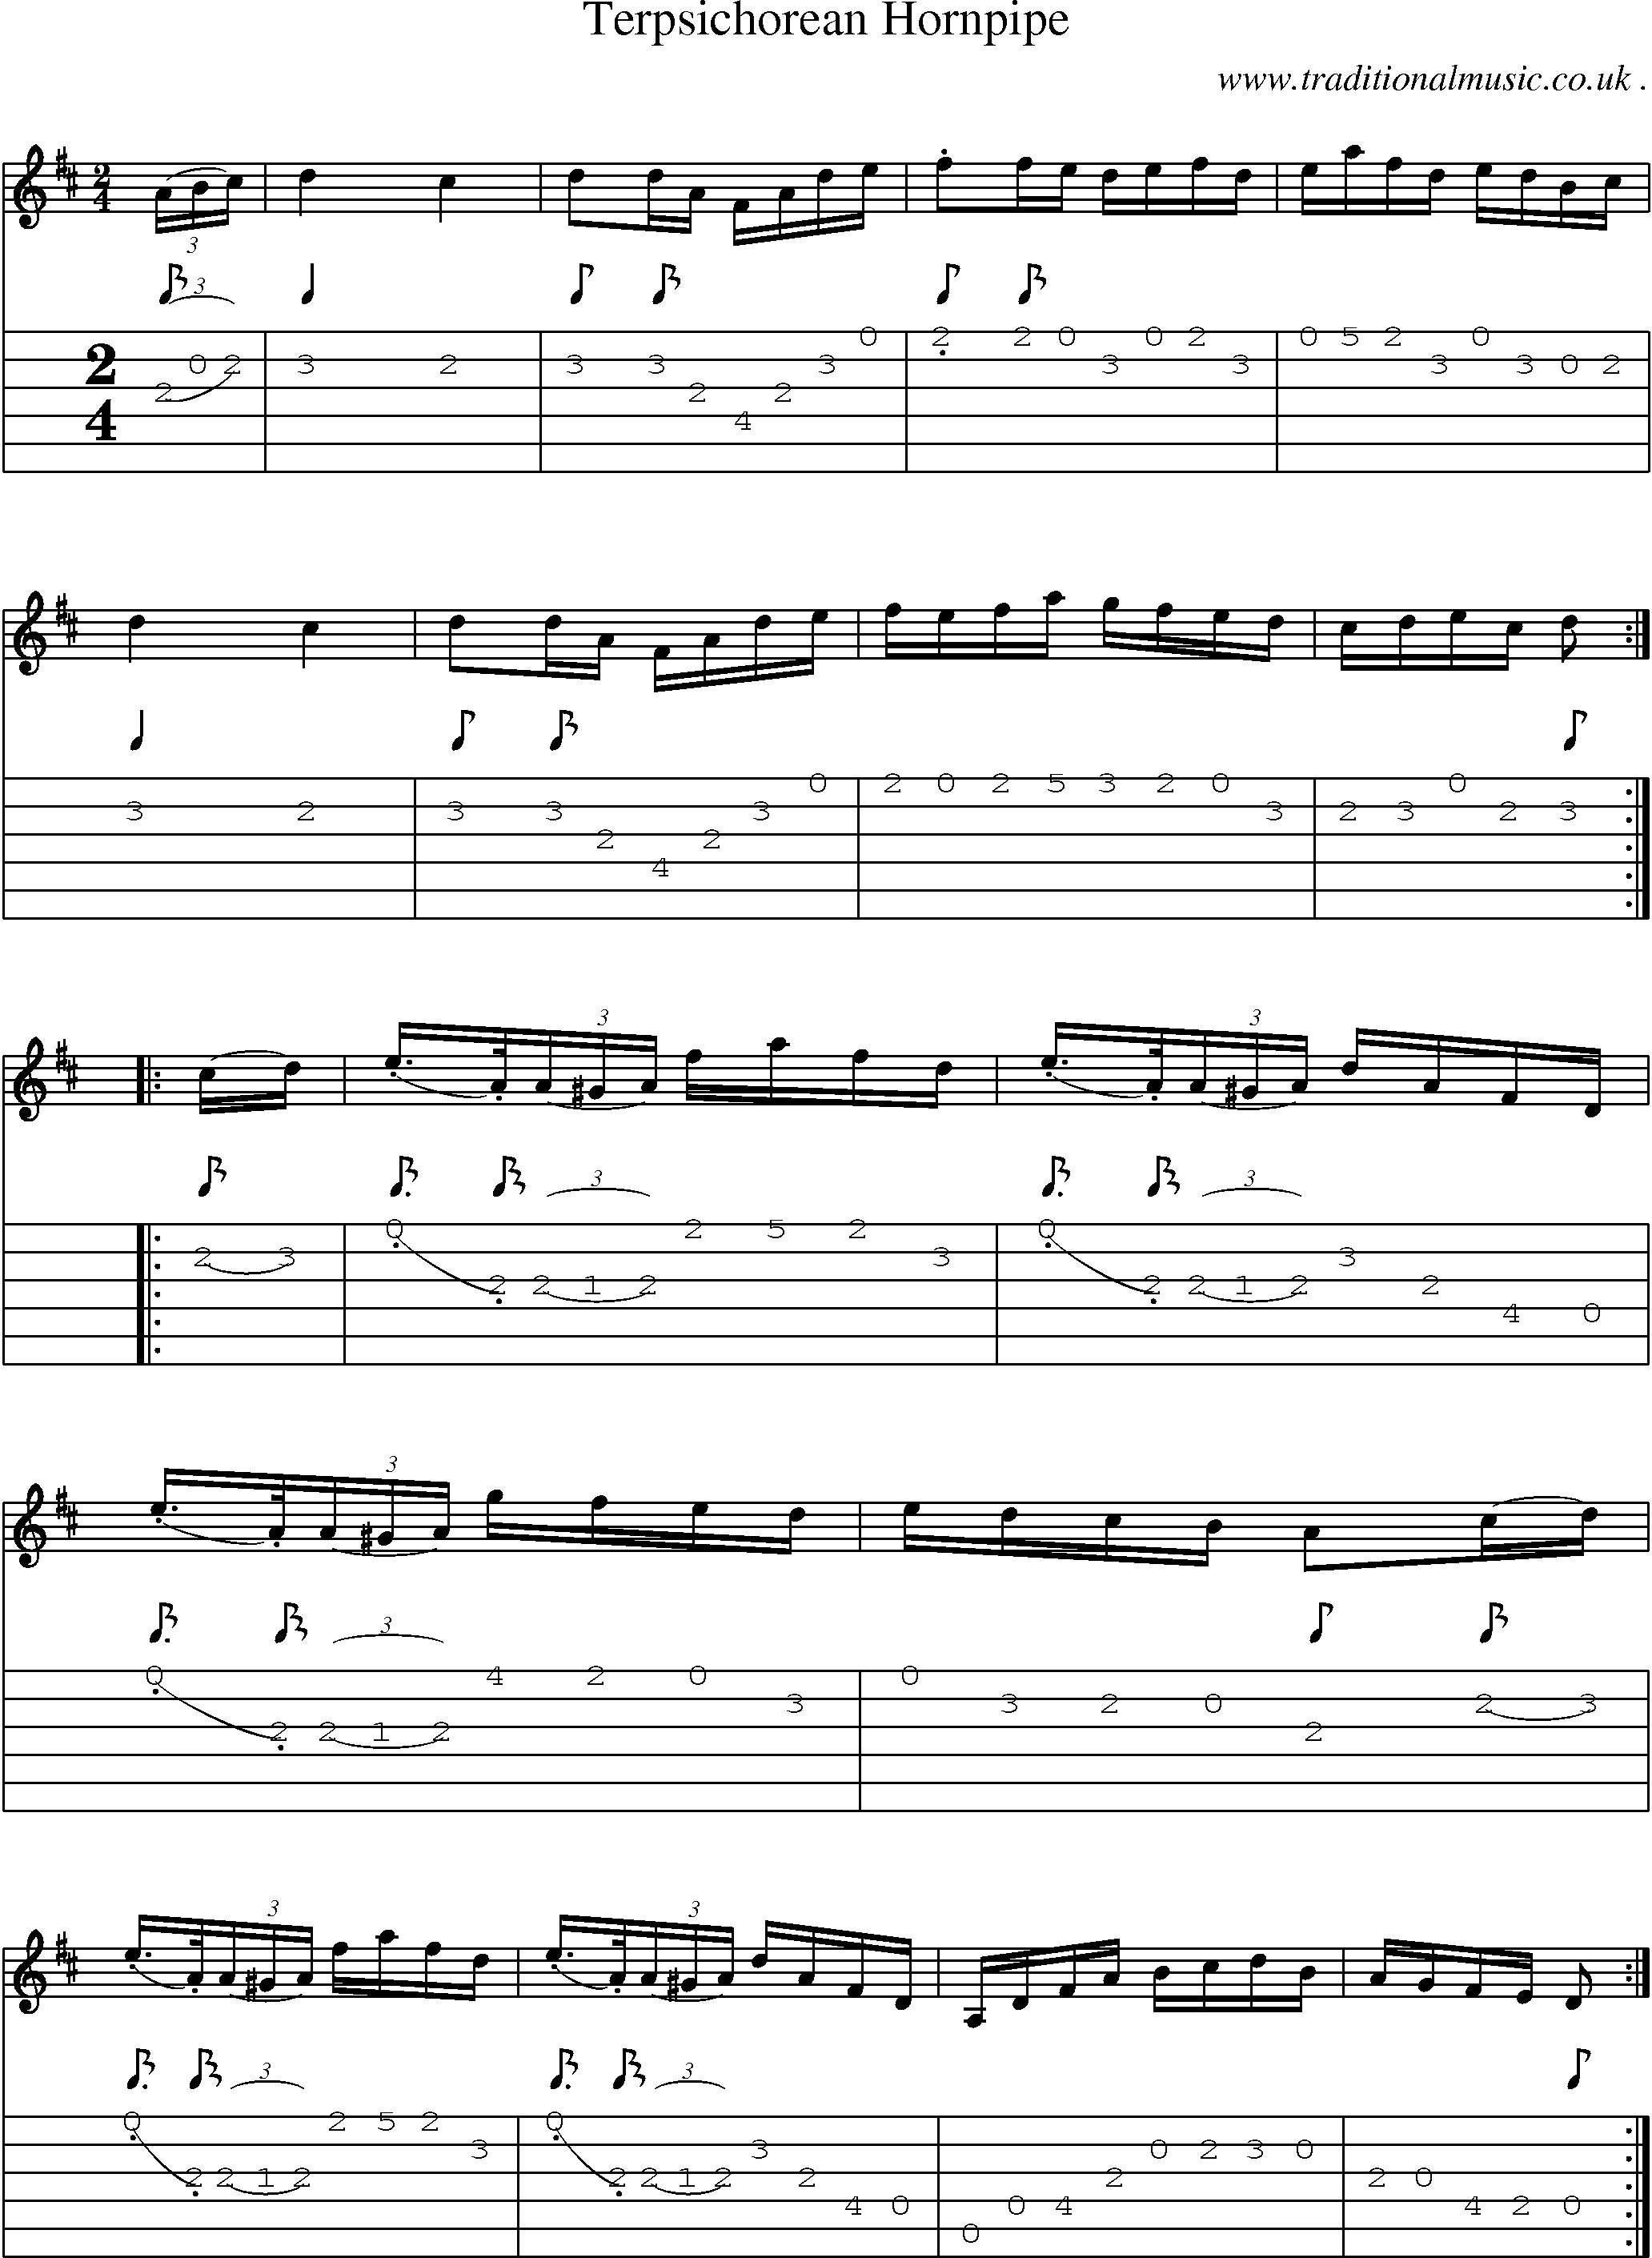 Sheet-Music and Guitar Tabs for Terpsichorean Hornpipe